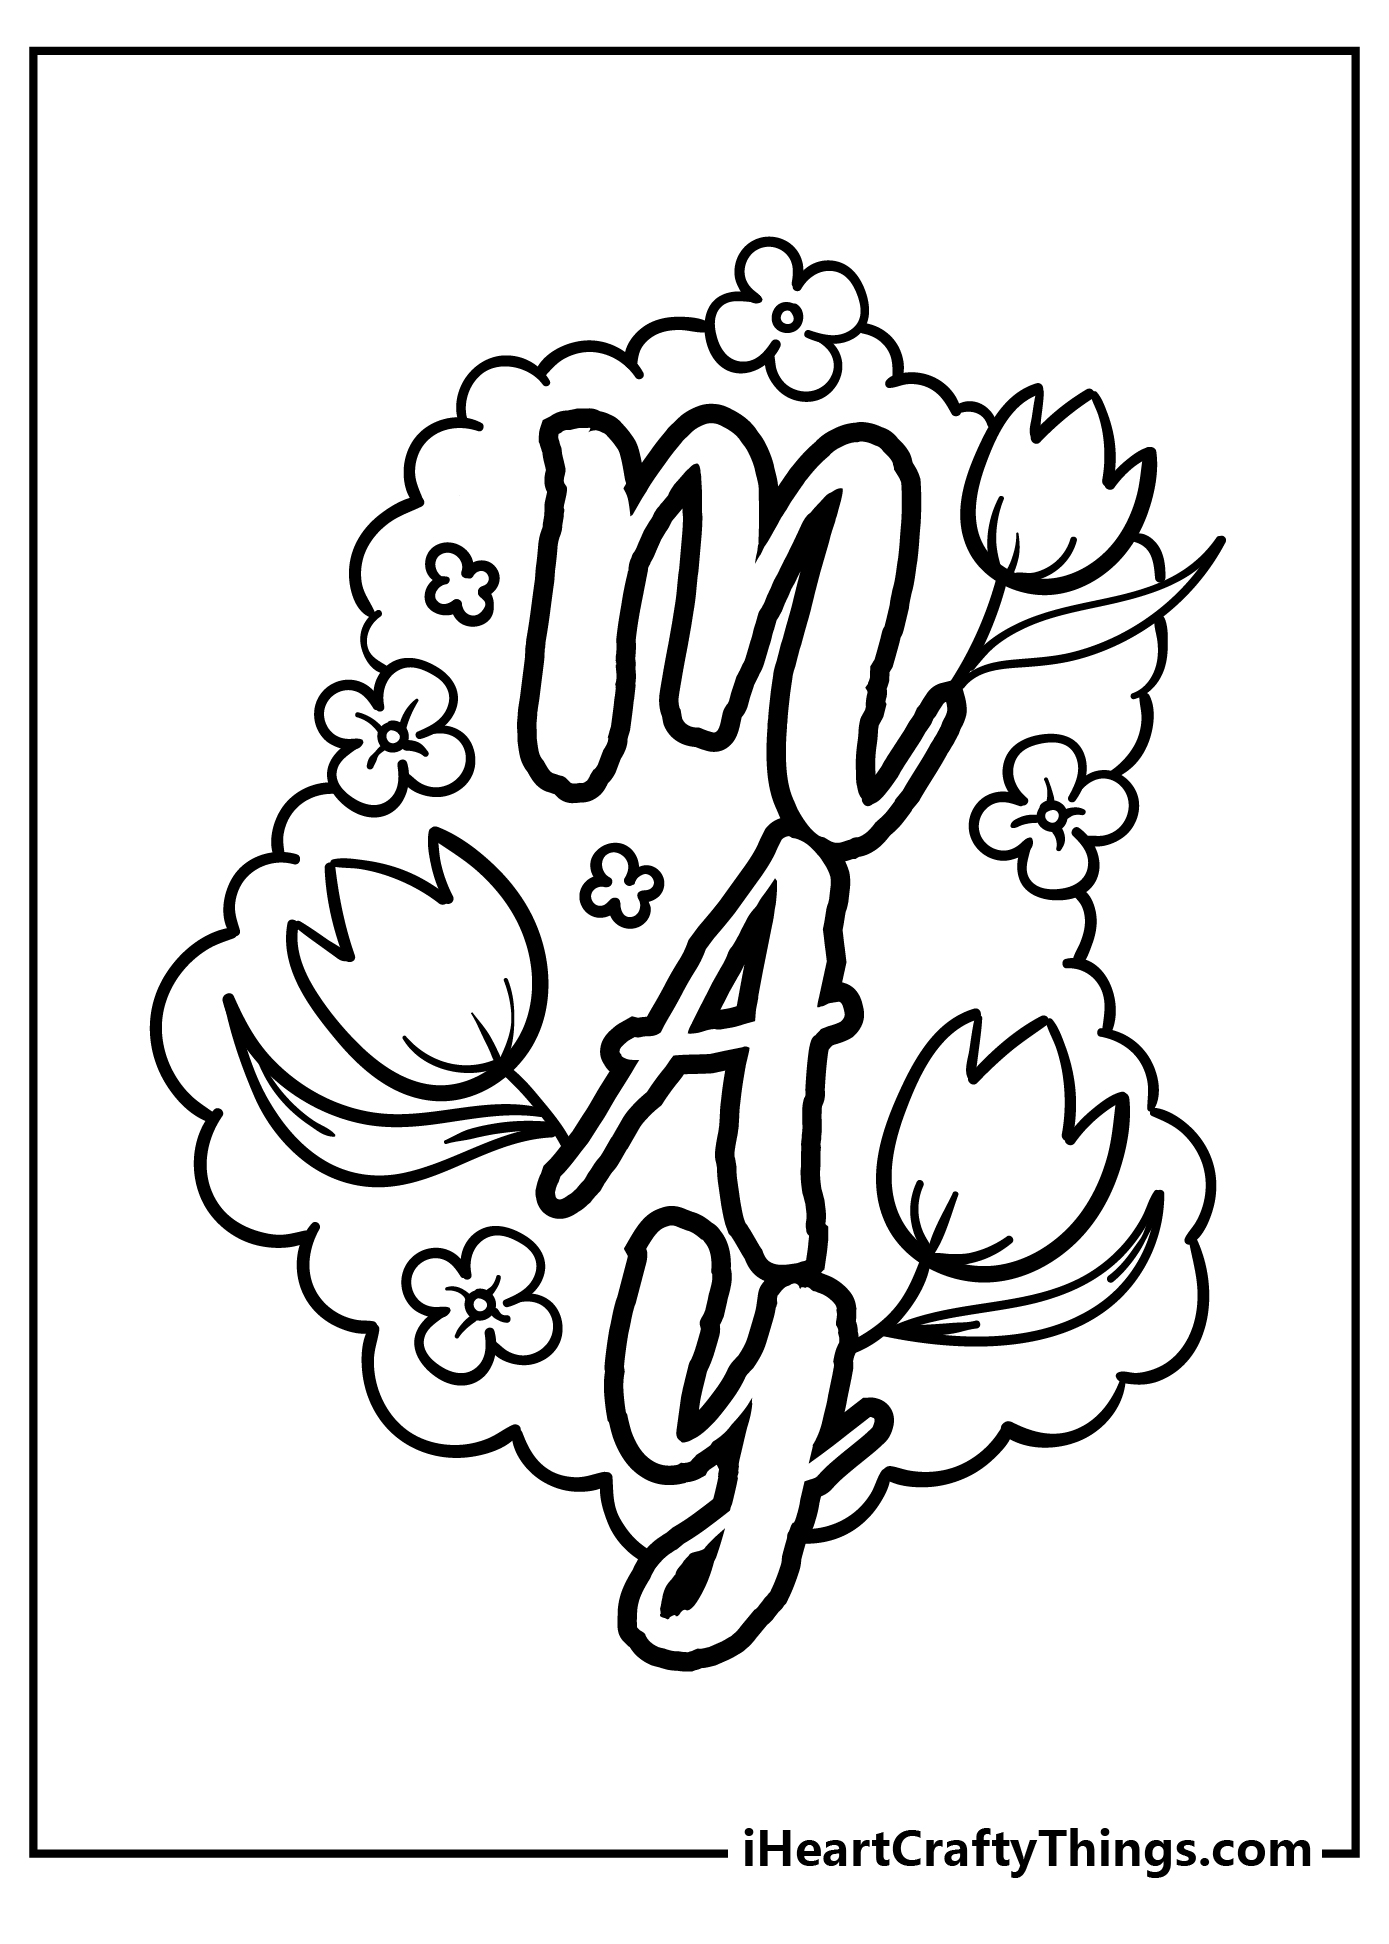 May coloring pages free printables